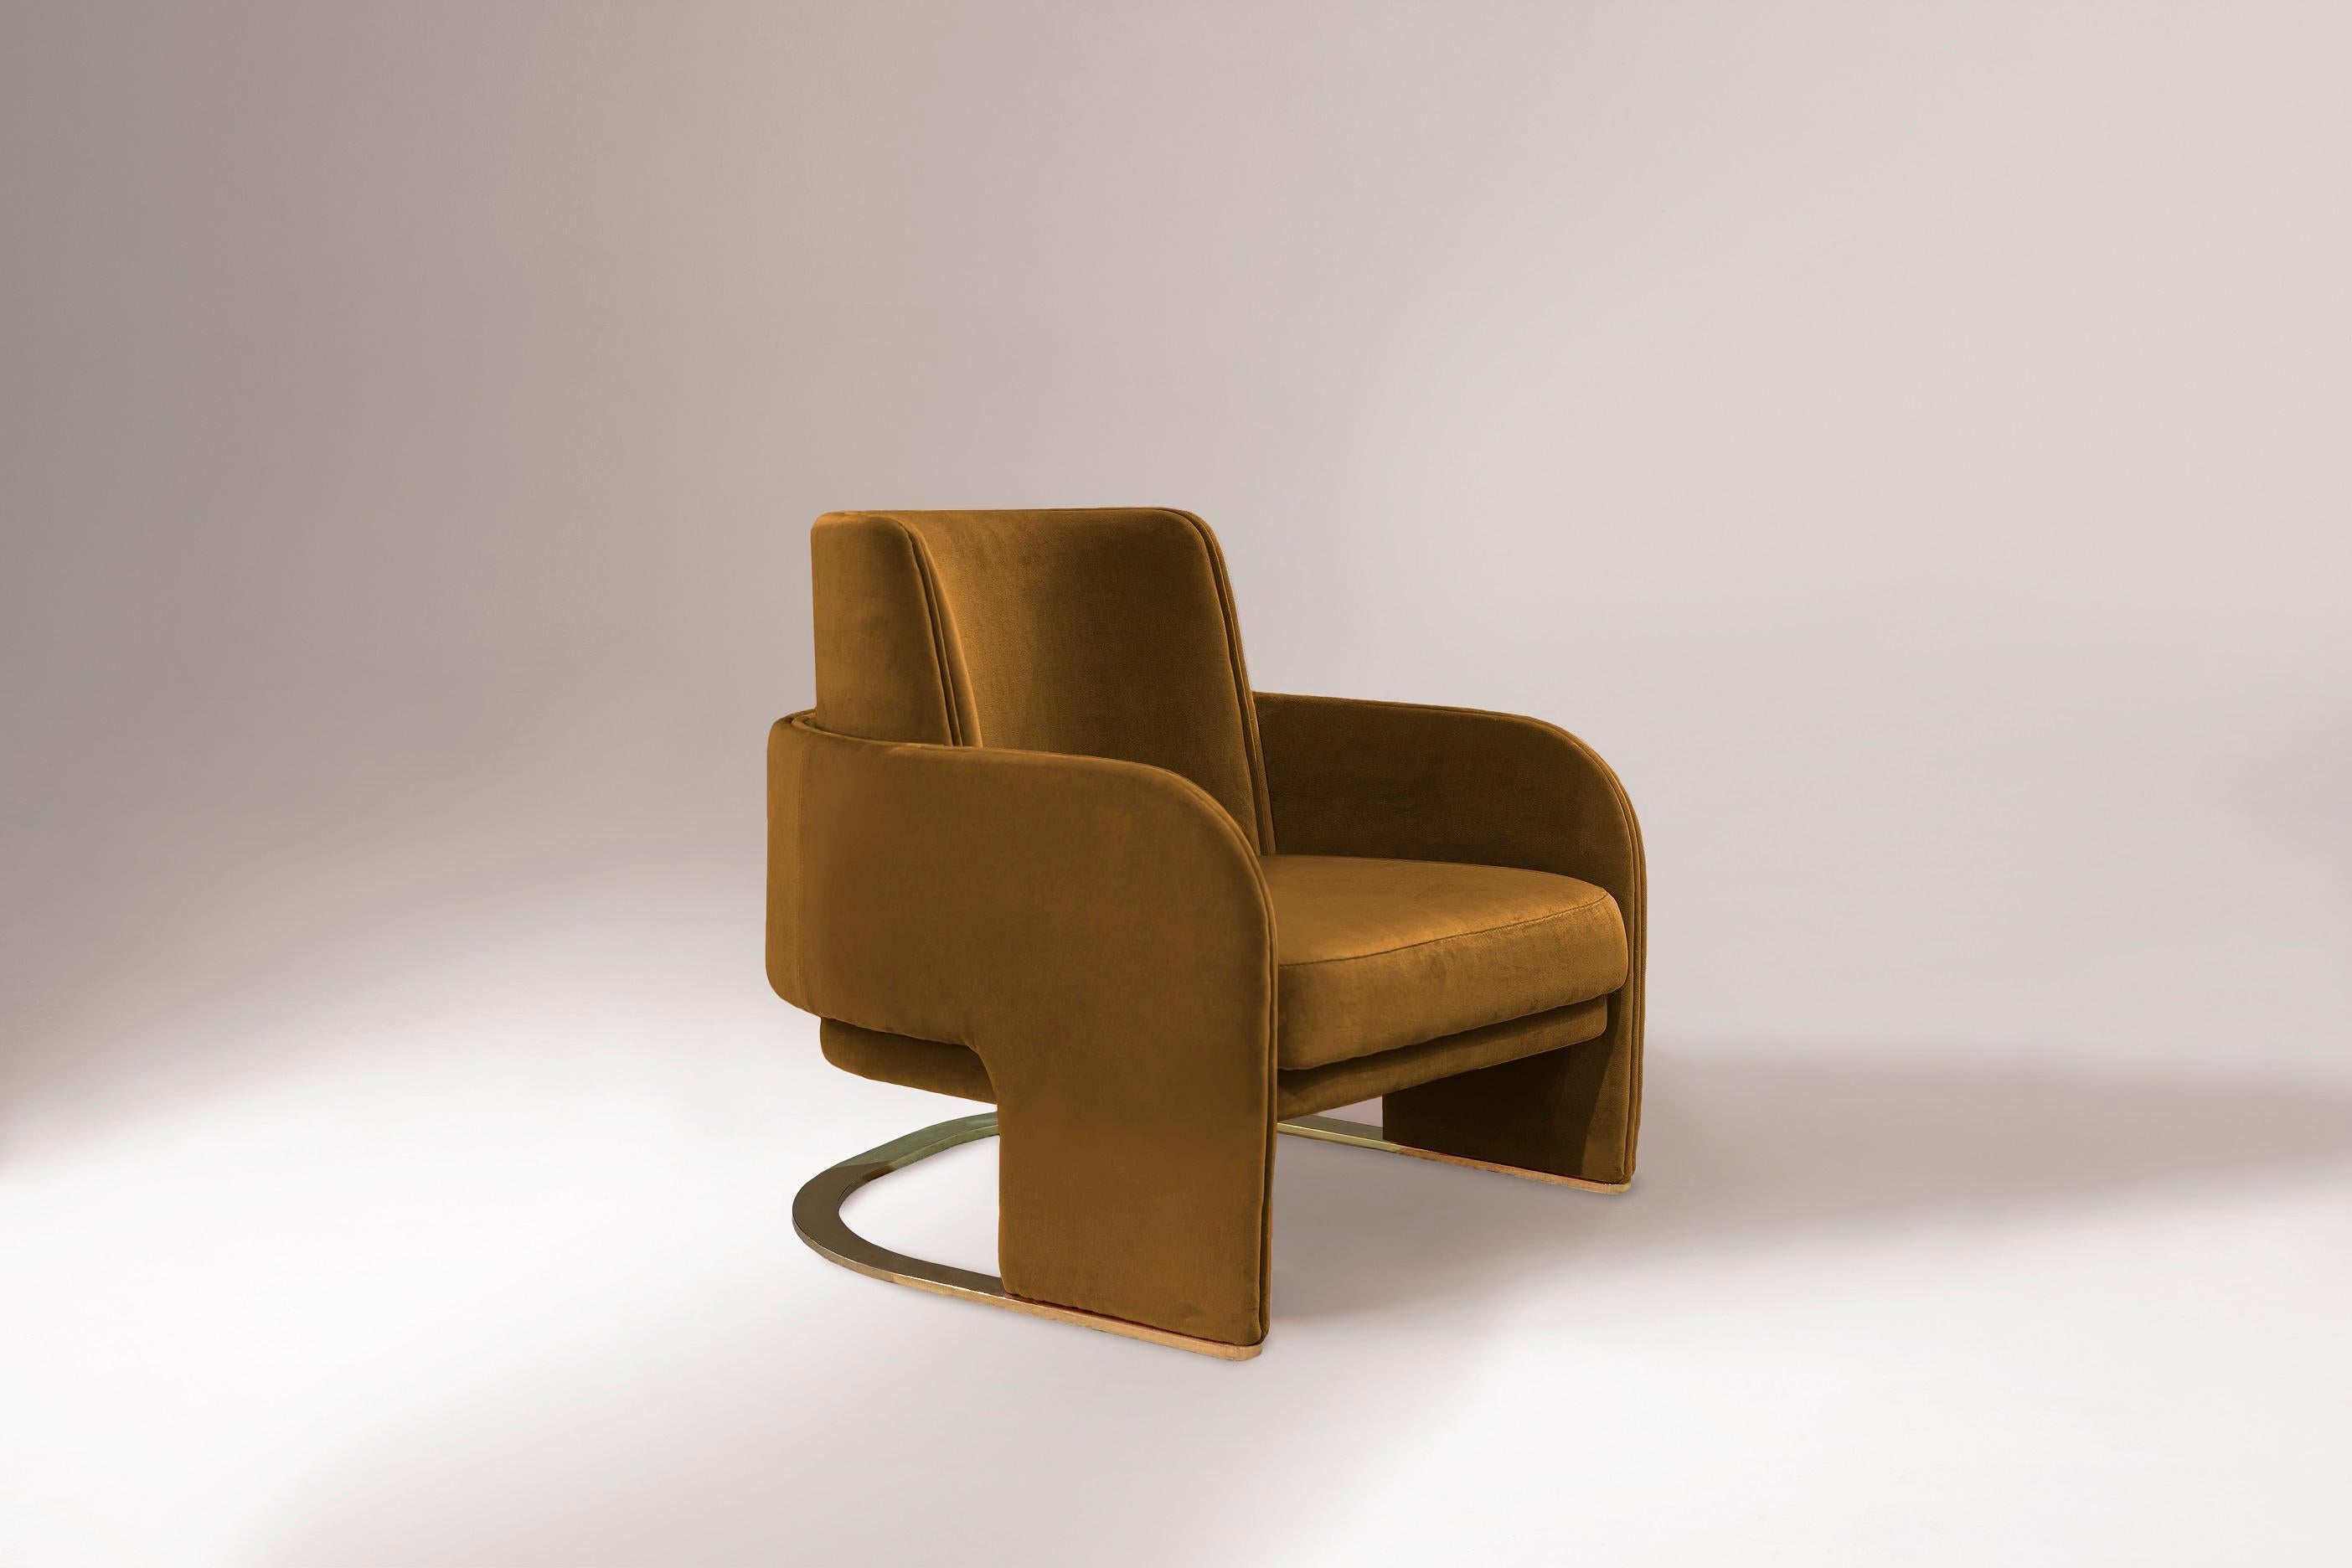 Odisseia armchair embodies the aesthetic spirit of the space age, a new kind of discreet luxury and comfort inspired by a futuristic era created by new visual experiences and concepts of the future. This effortless but striking piece insinuates a